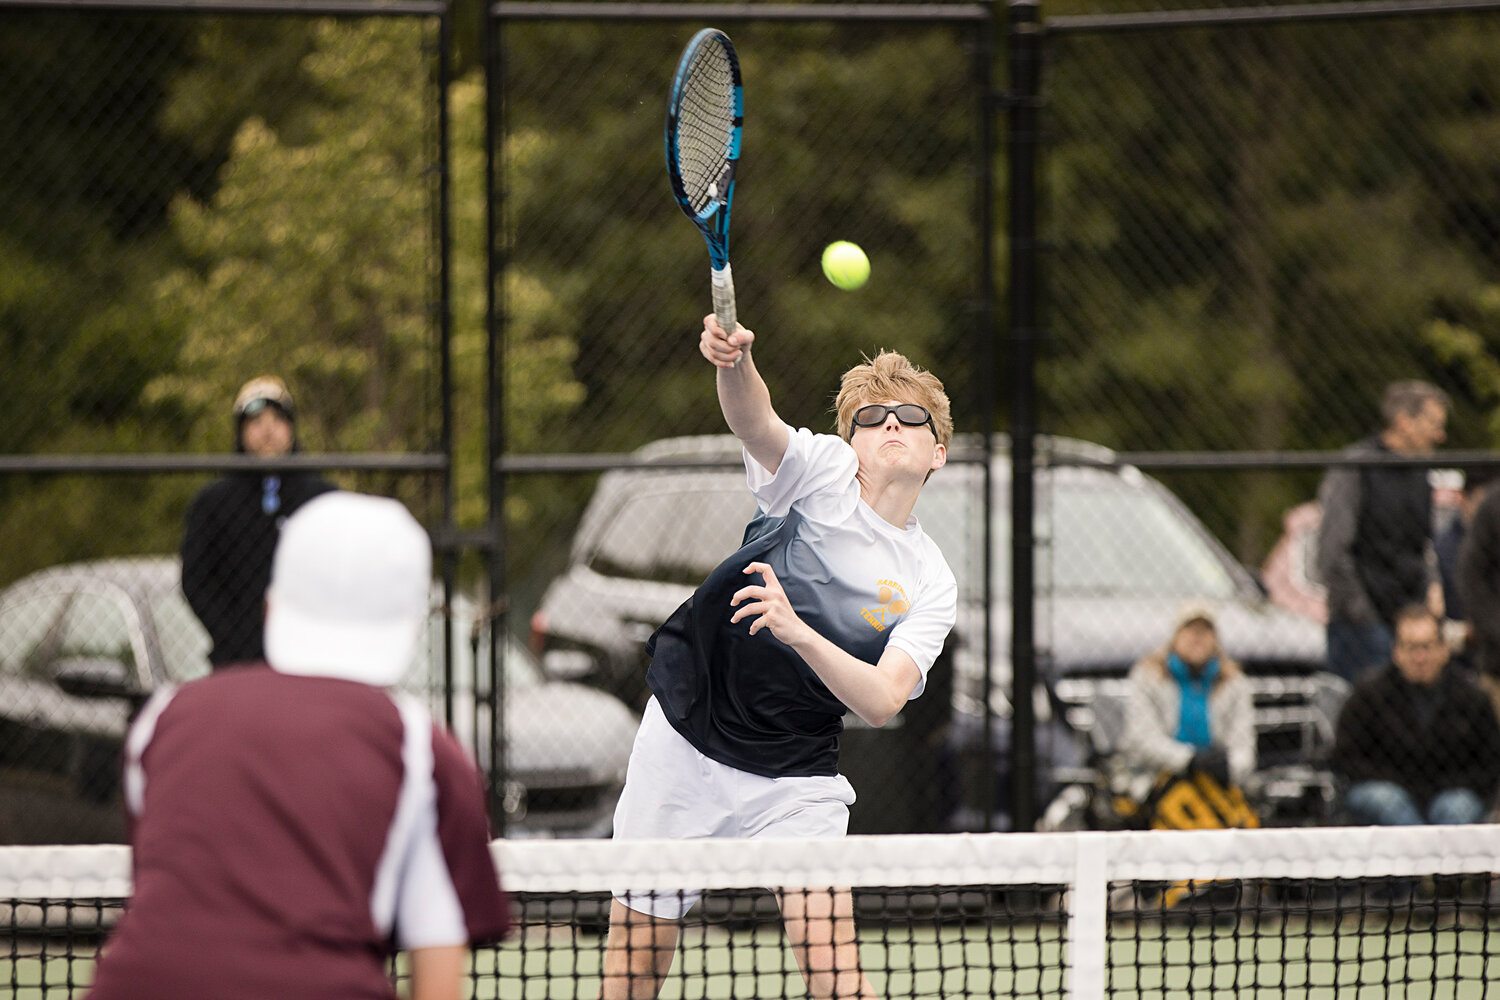 No. 3 doubles player, Garrett Meehan hits a hard shot back toward LaSalle opponents while battling in the Division 1 finals, Saturday.